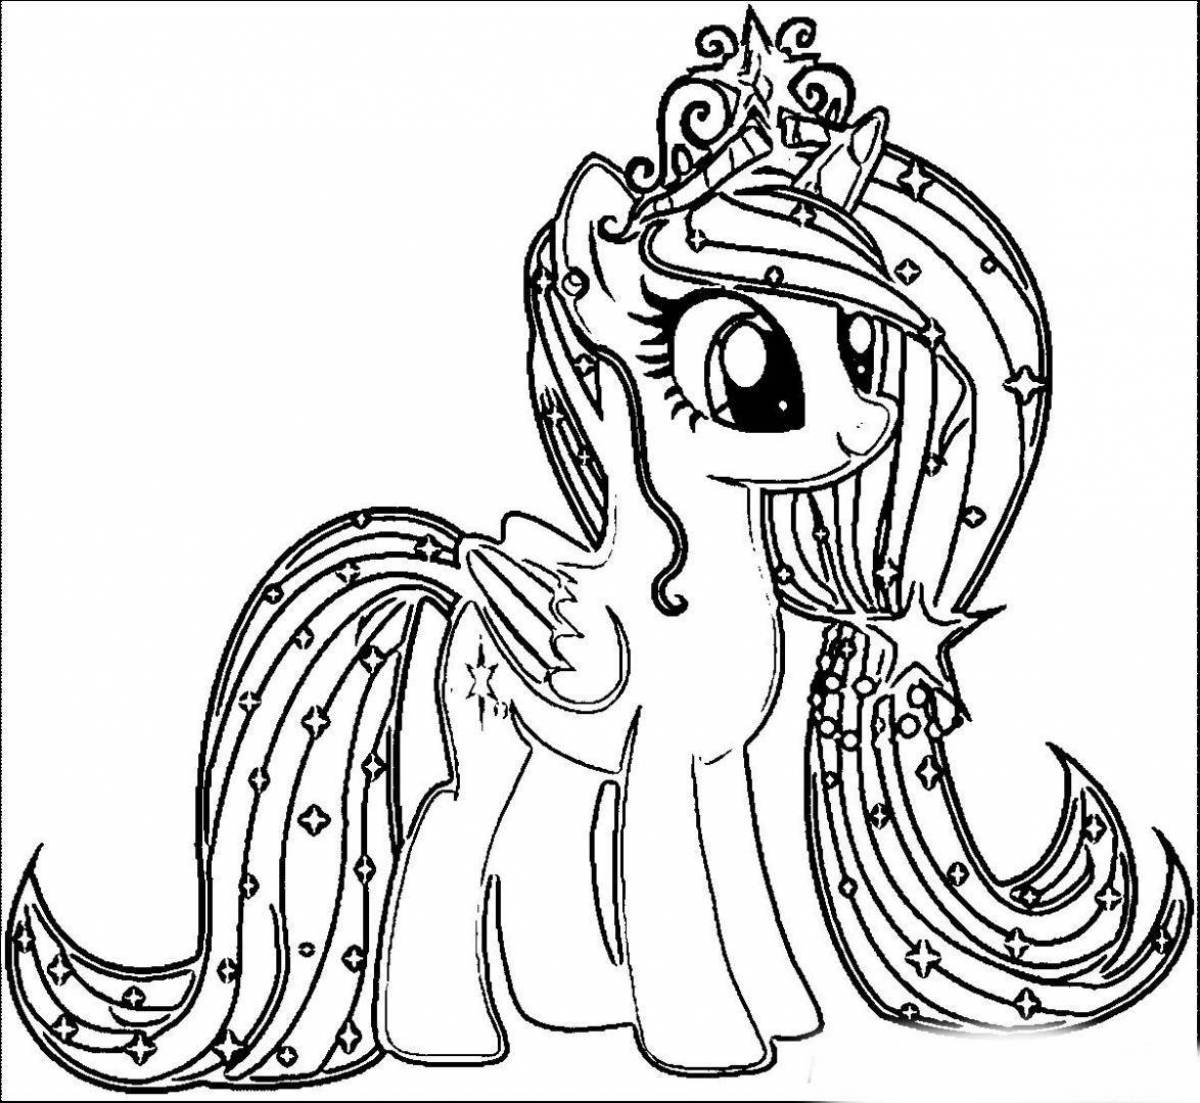 Coloring book shining baby pony